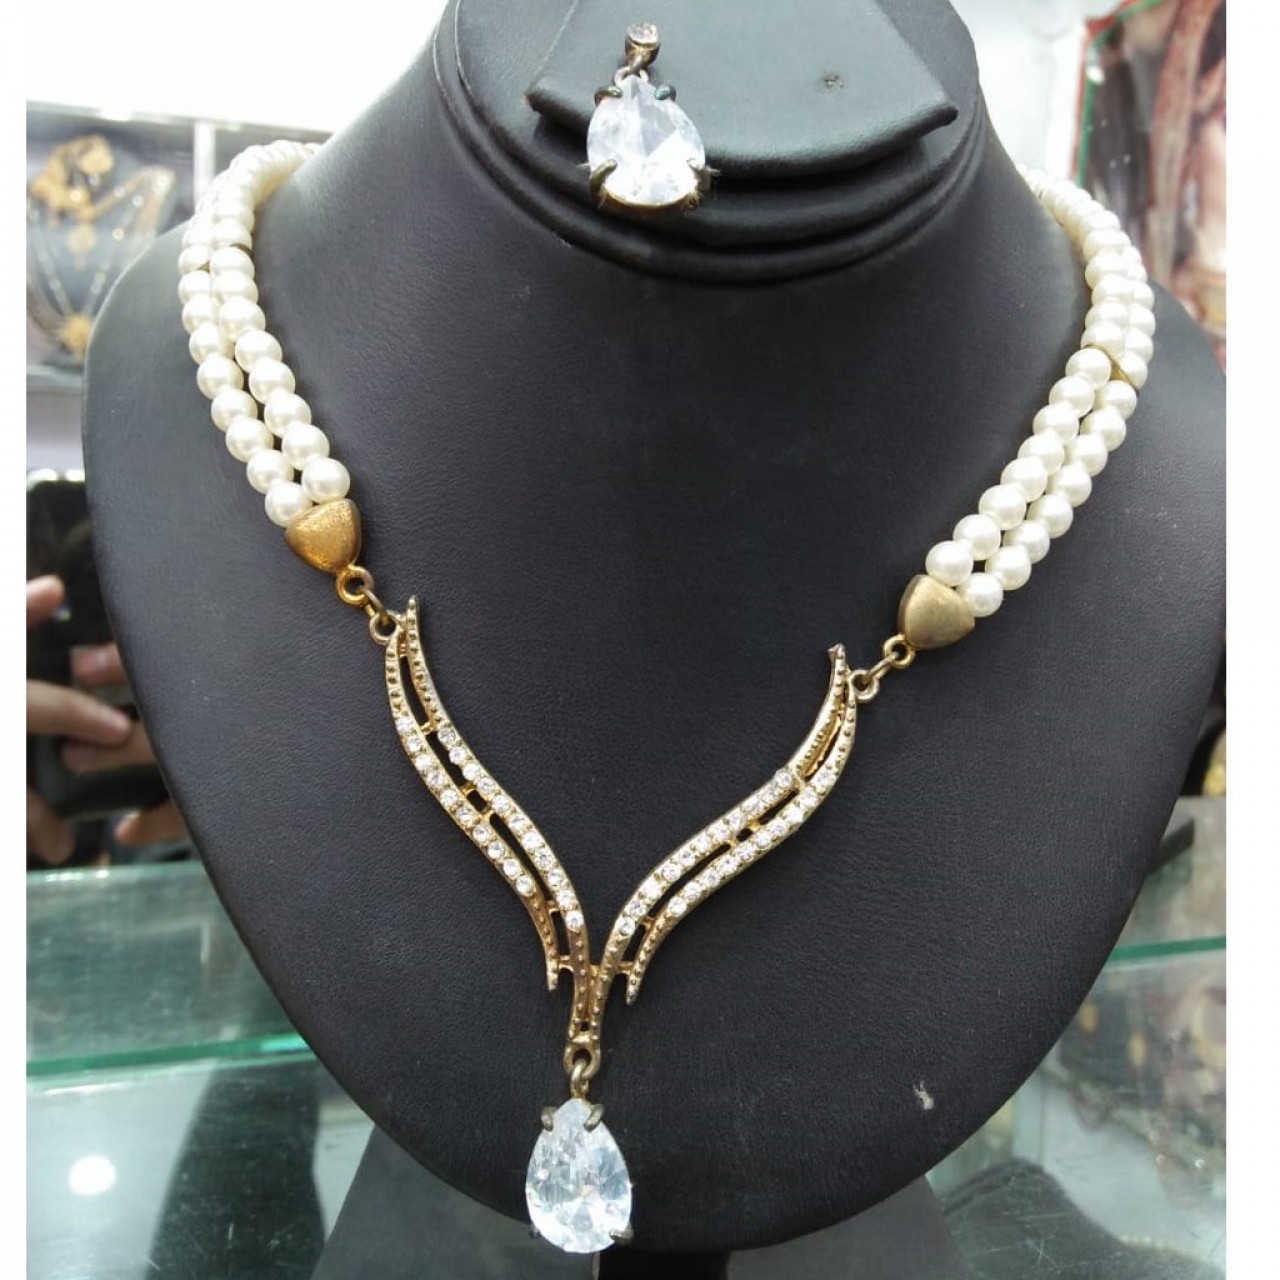 Amazing White Beads Pendent & Earrings Jewelry Set For Women - Thai Material